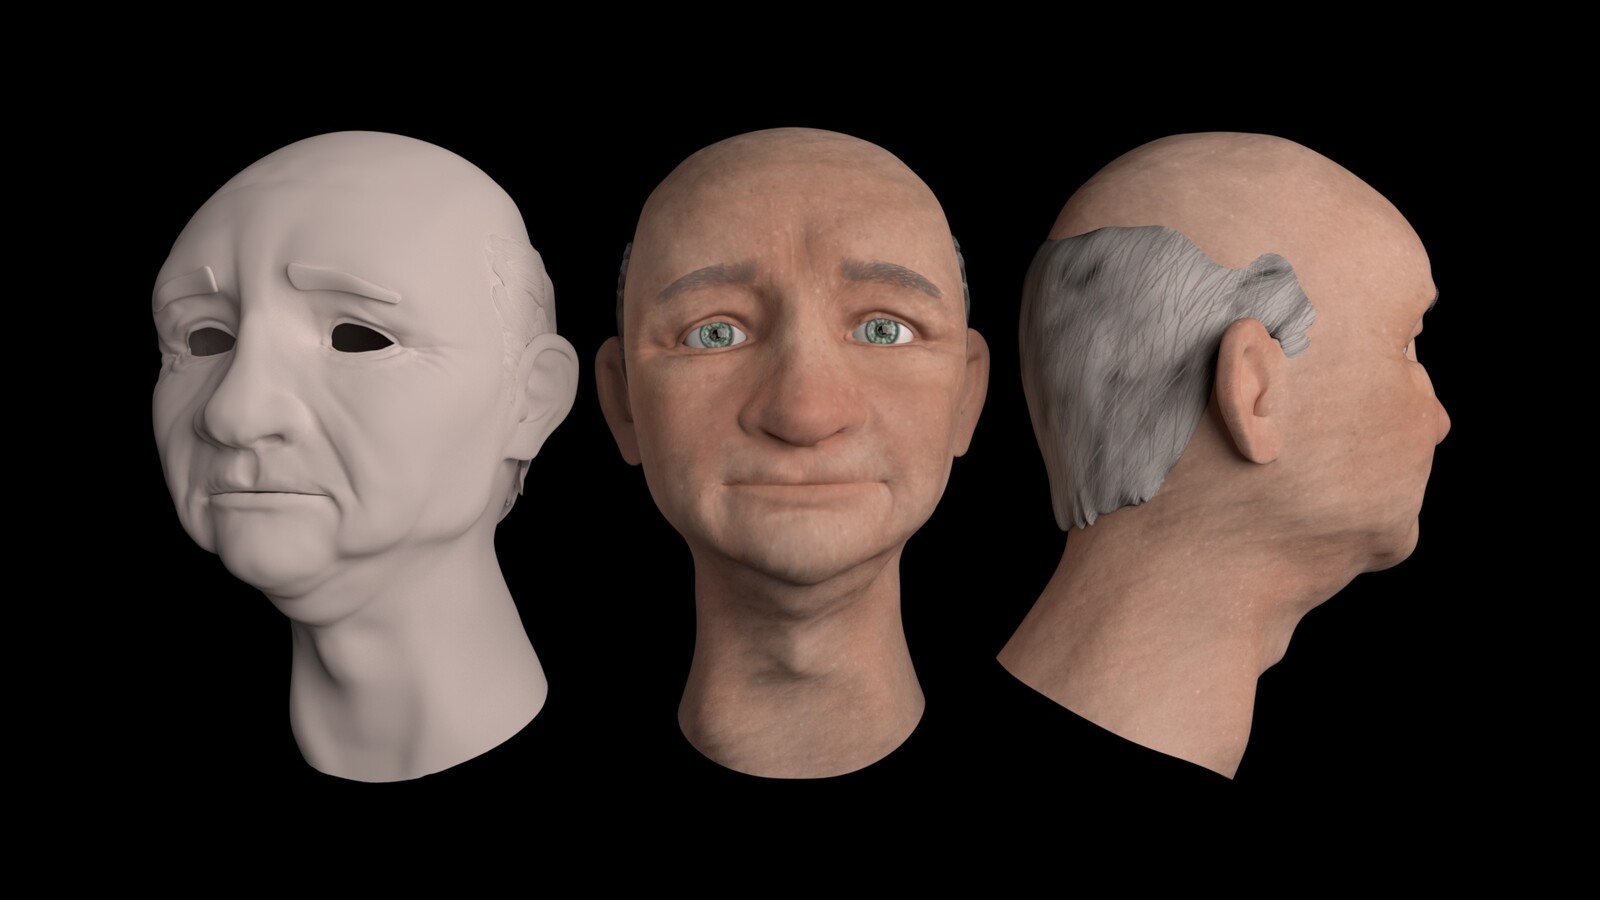 Head turnaround. Hight poly sculpt on the left.